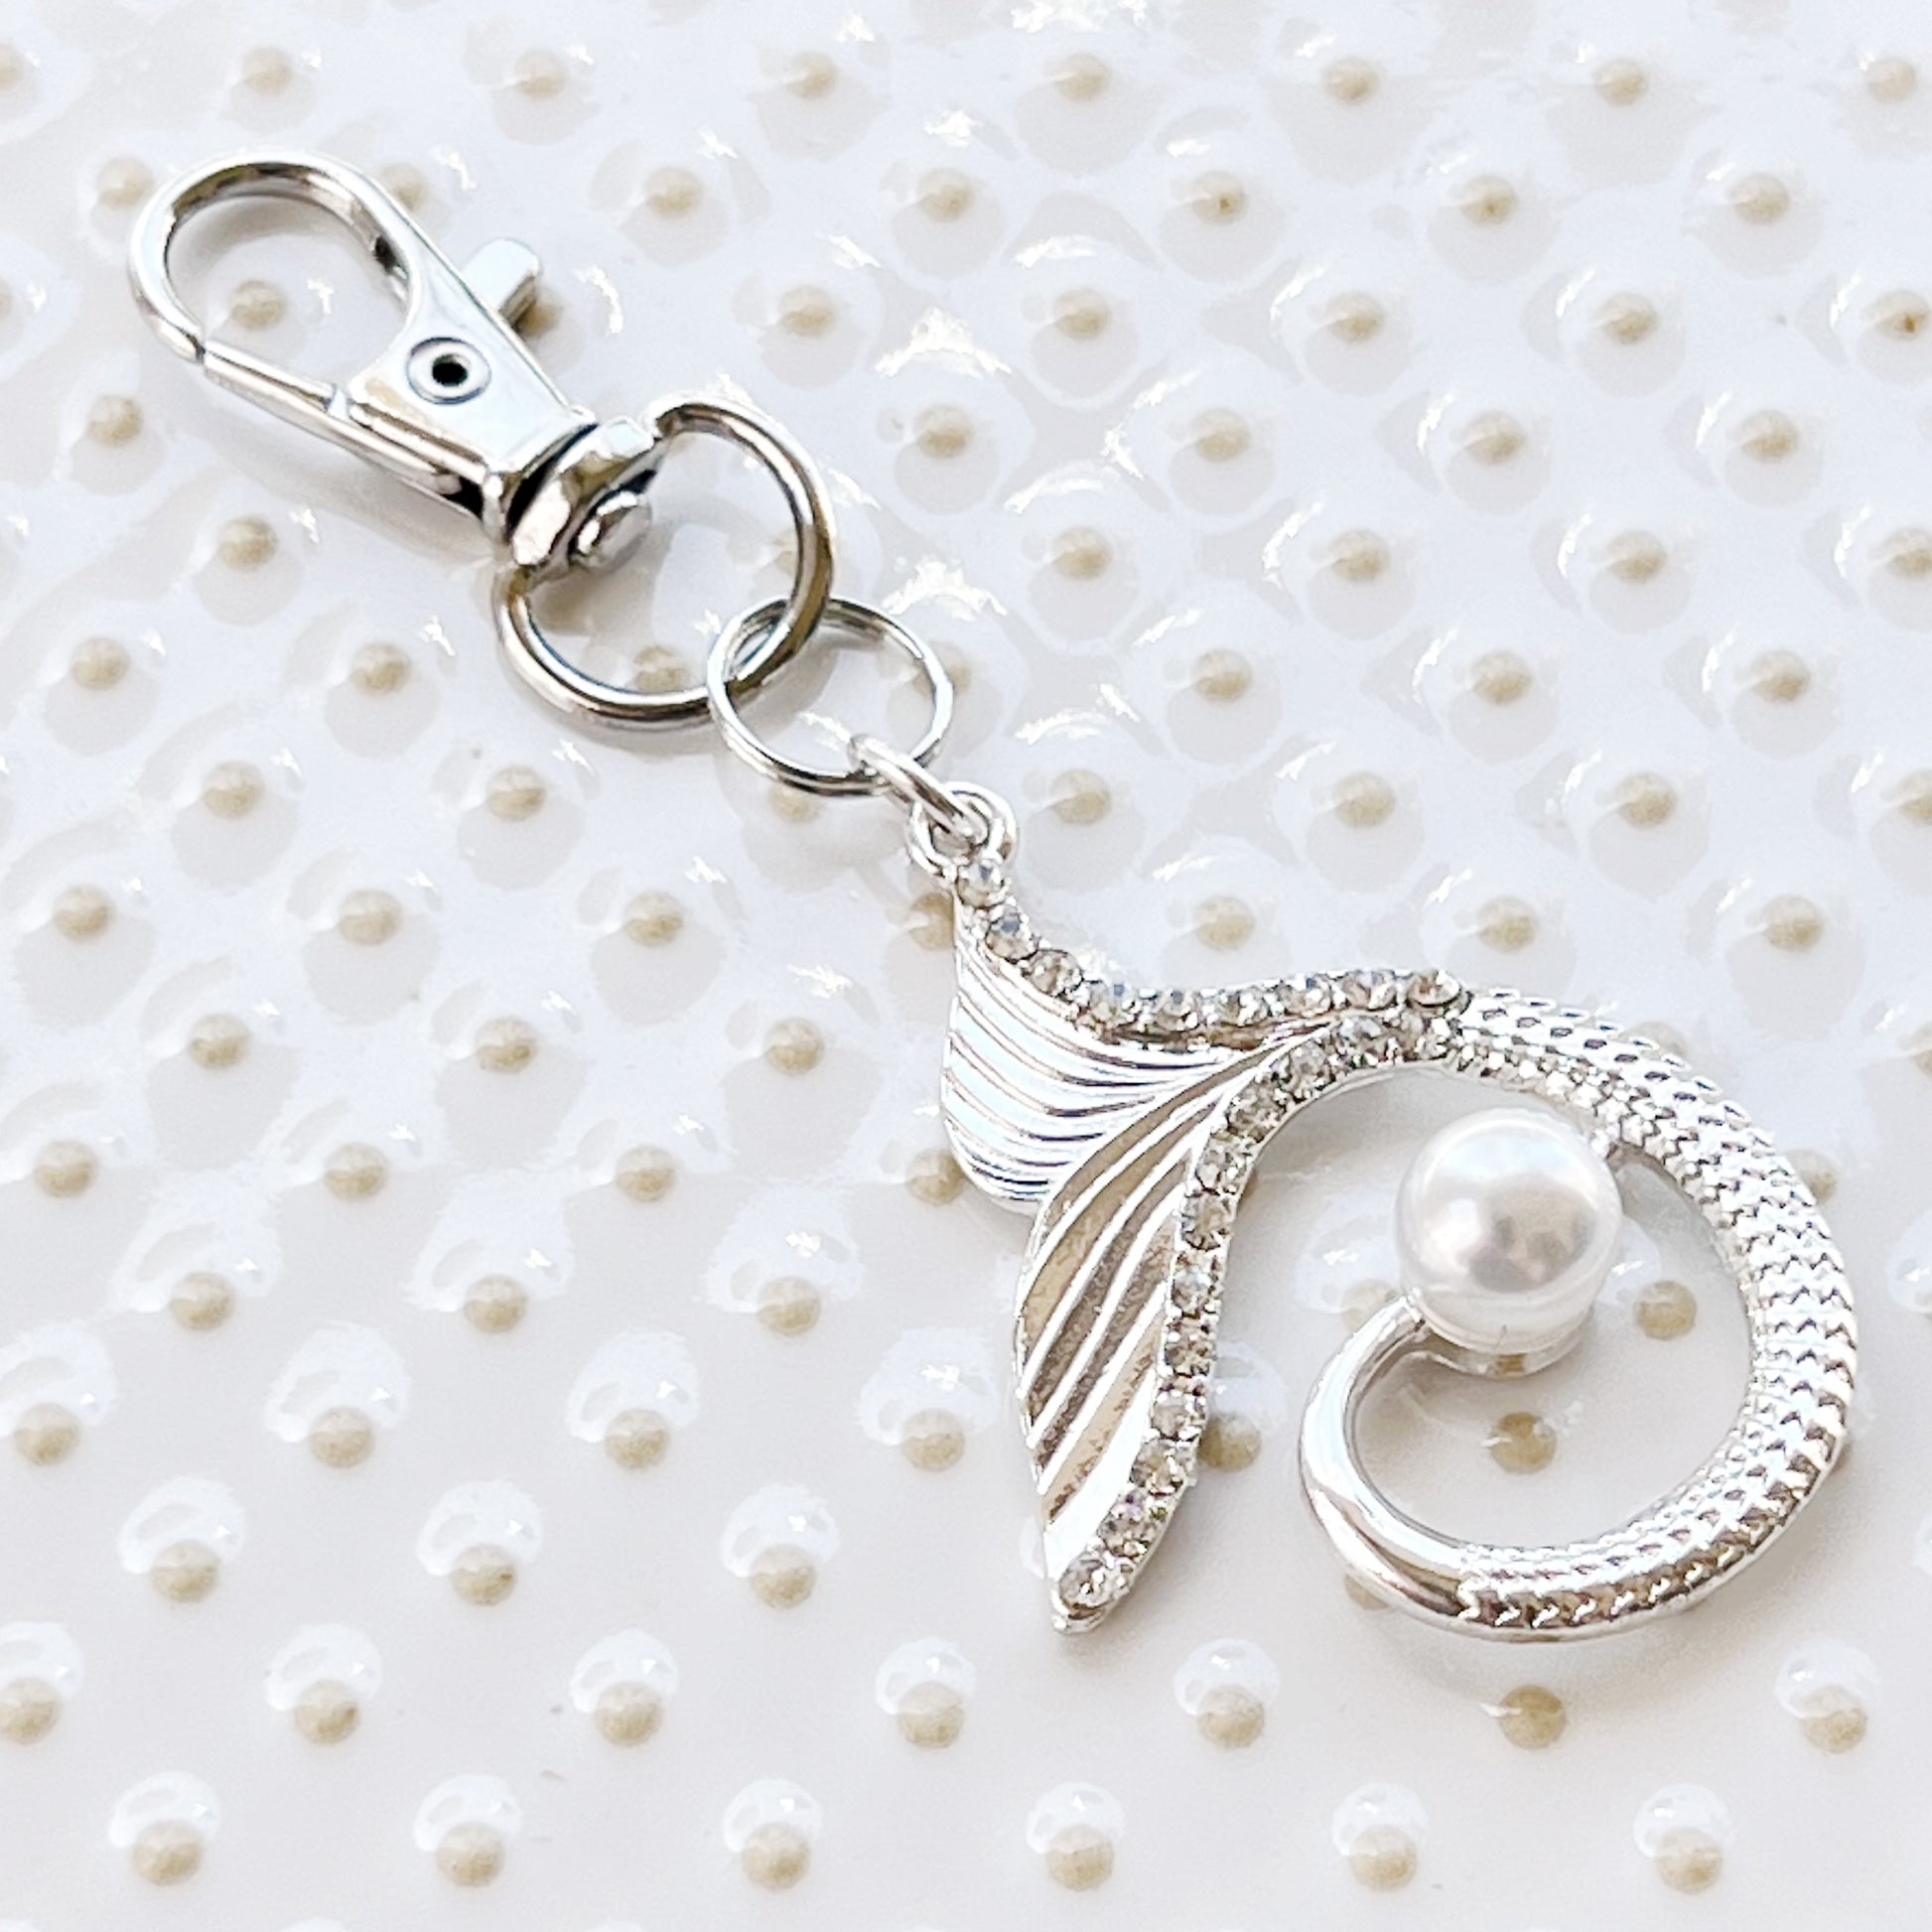 Silver Mermaid Zipper Pull Keychain Charm with Pearl and Rhinestone Accents